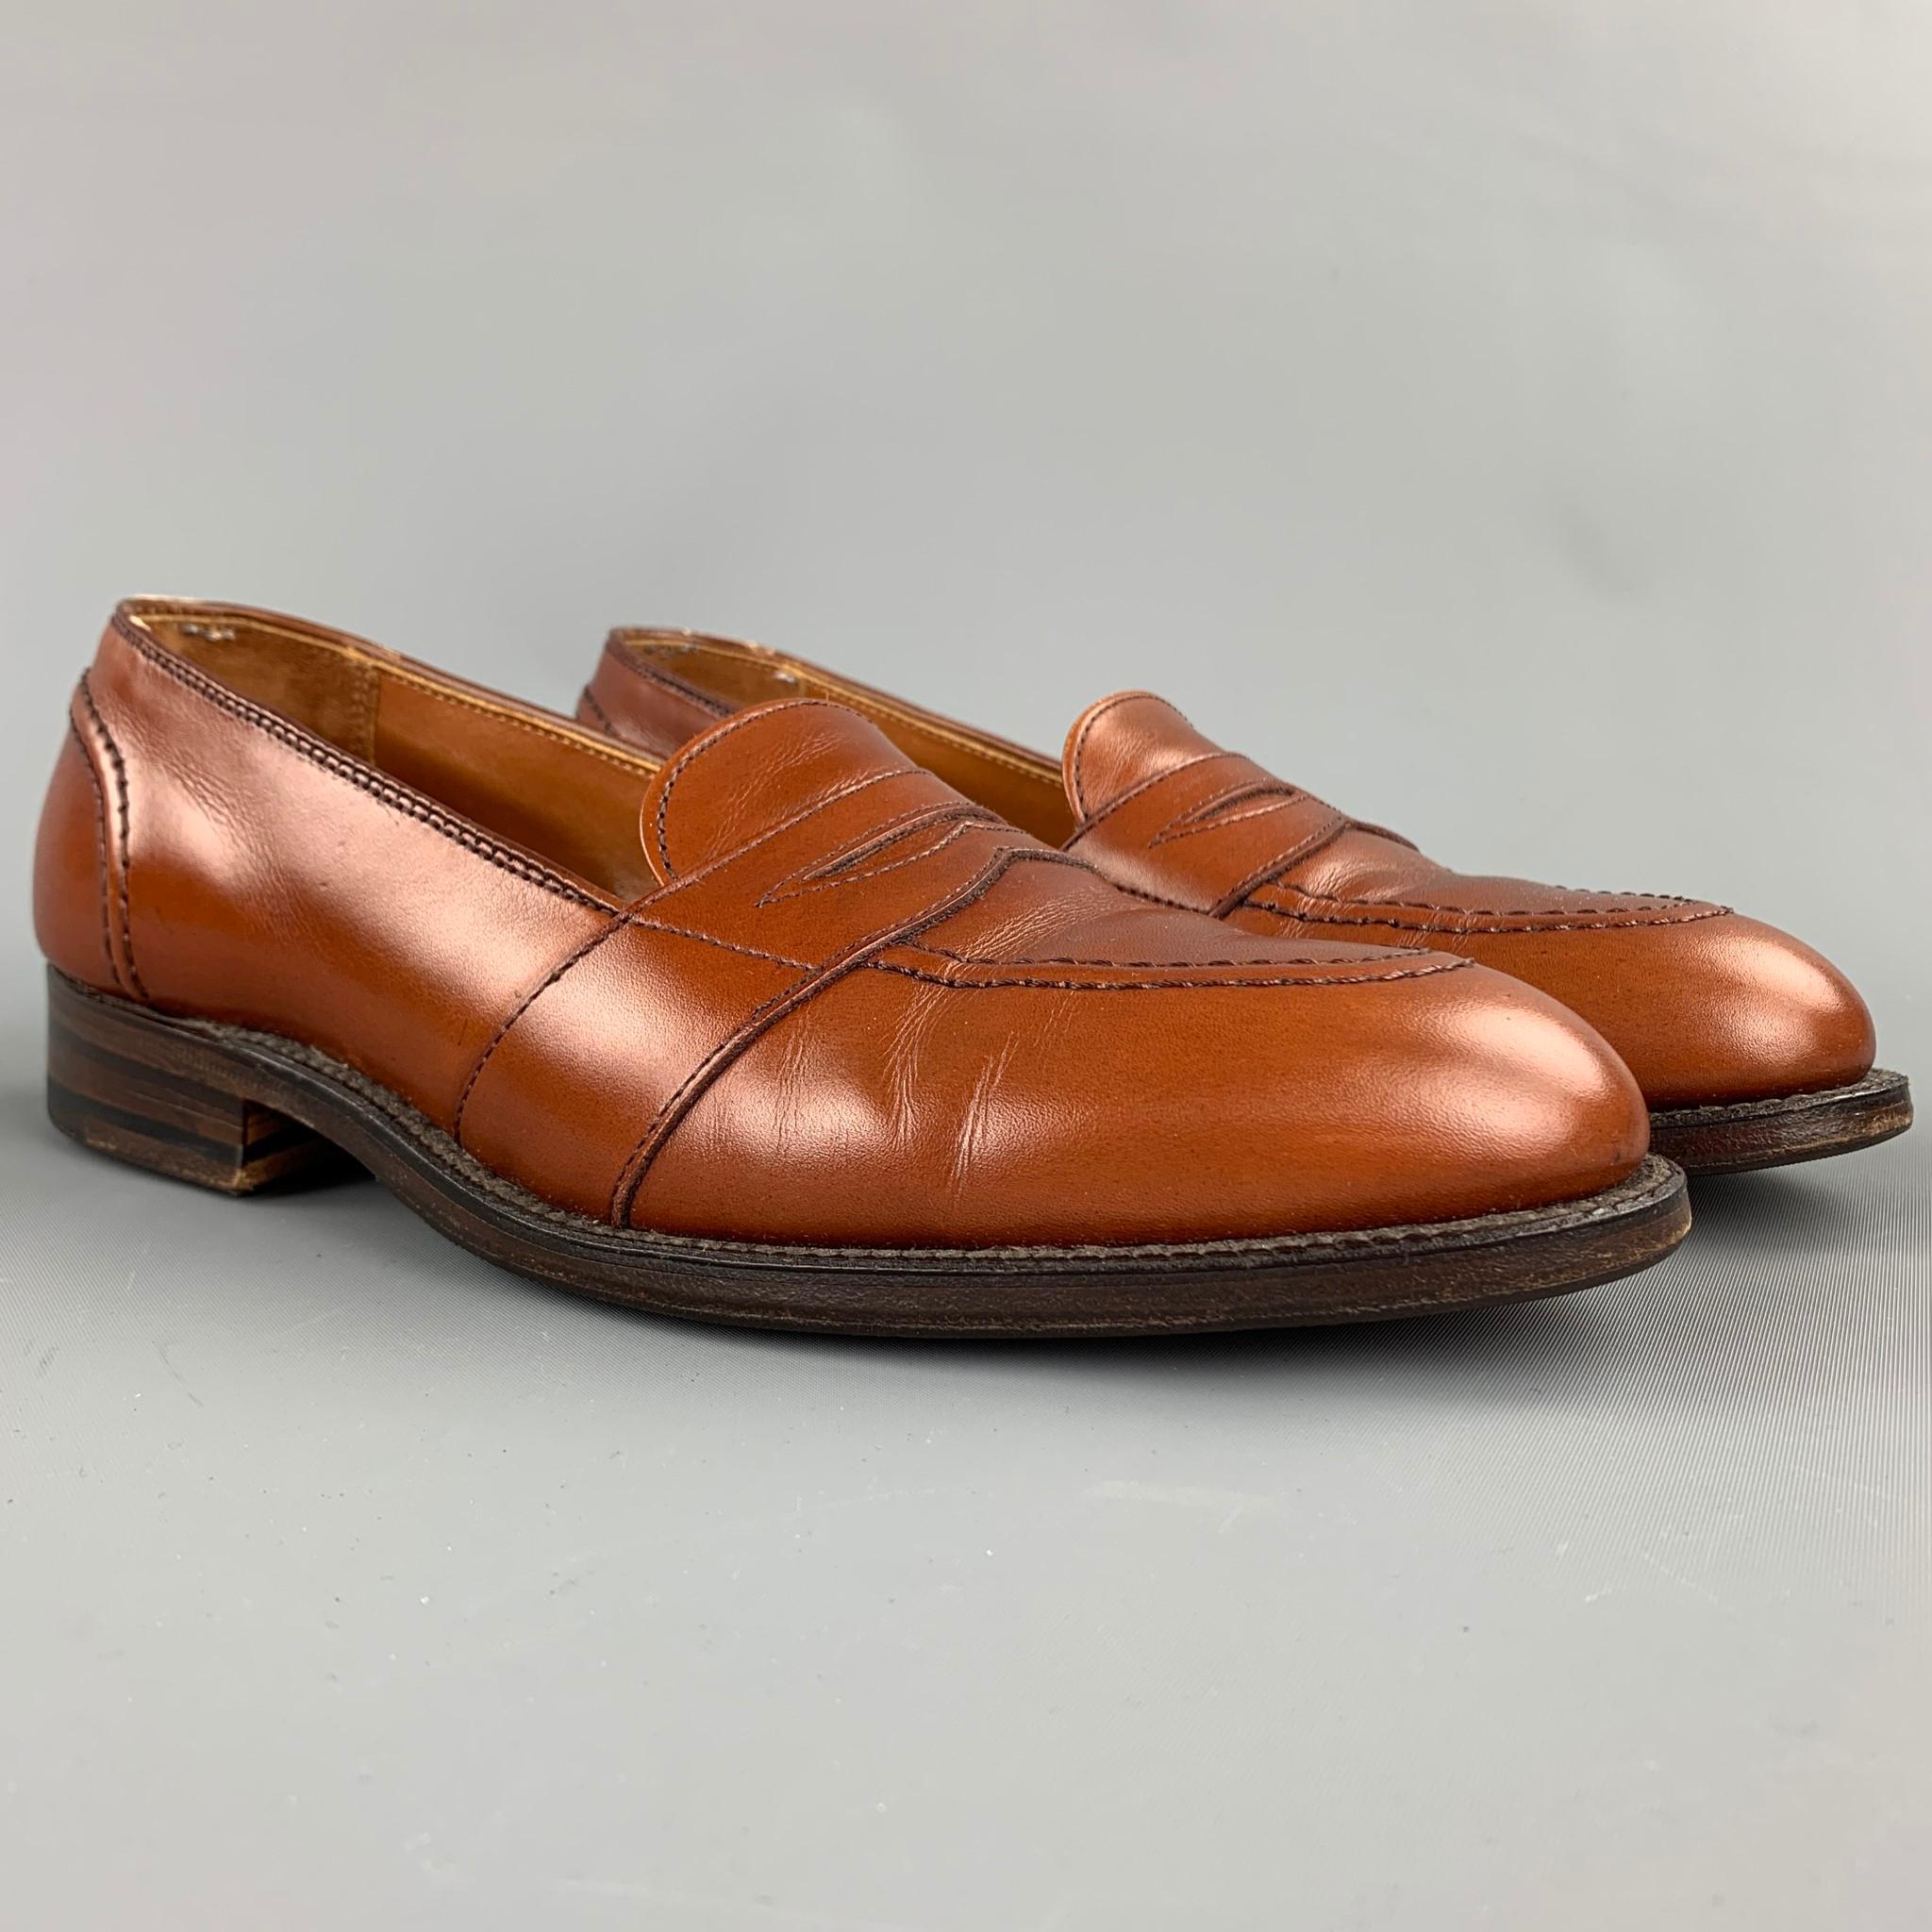 ALDEN loafers comes in a tan leather featuring a penny strap, top stitching, leather insole, and a wooden sole. Made in USA.

New With Box. 
Marked: 7 B  685

Outsole: 11 in. x 4 in. 